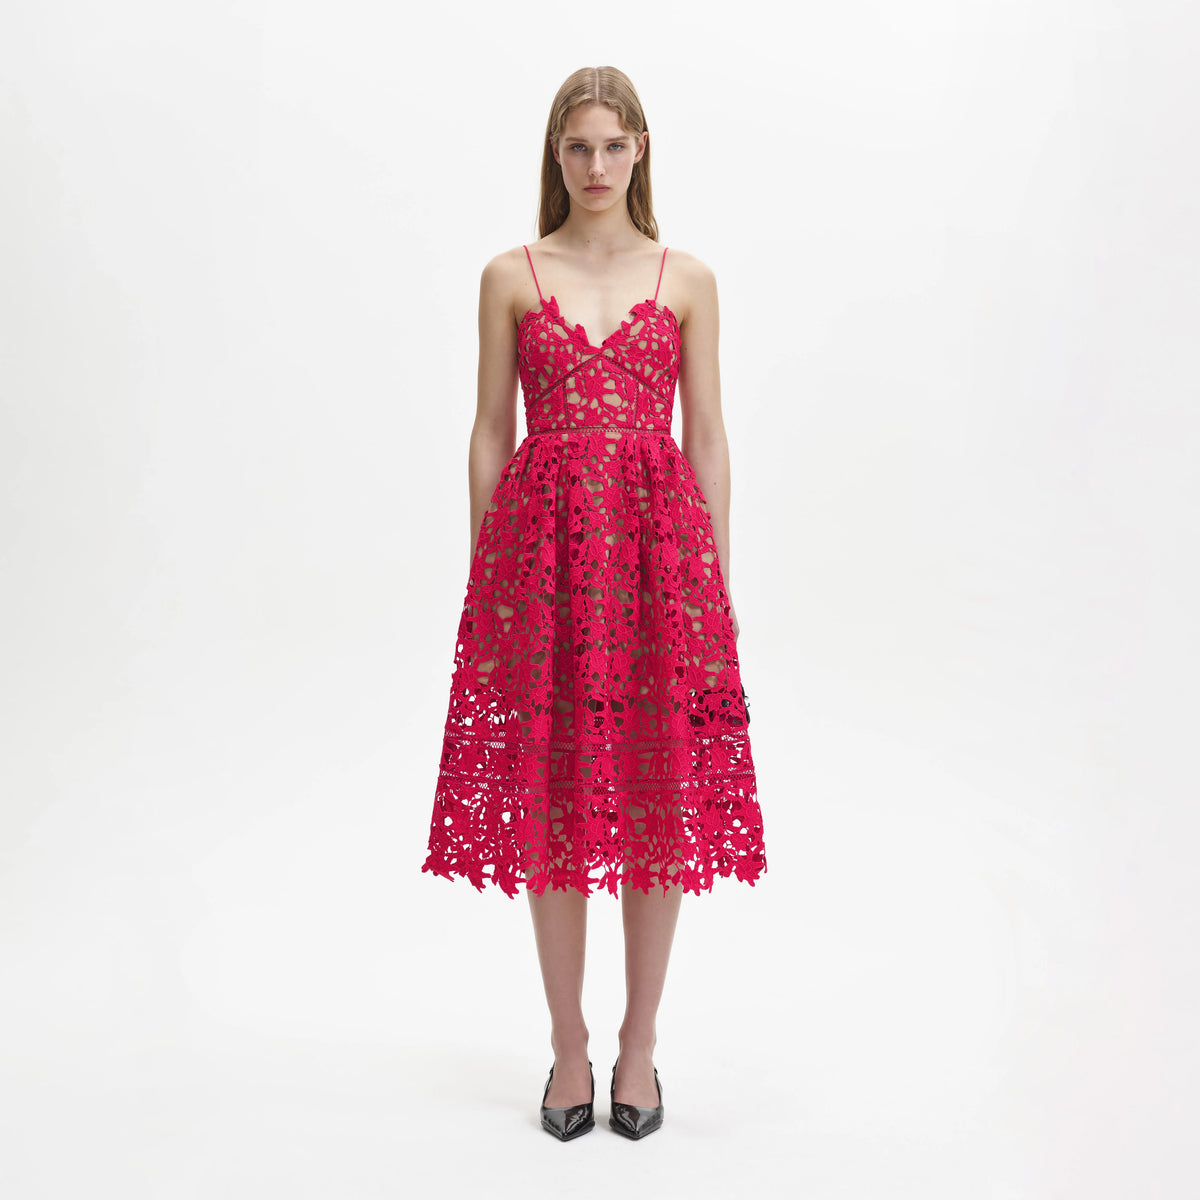 Deep pink lace dress with spaghetti straps